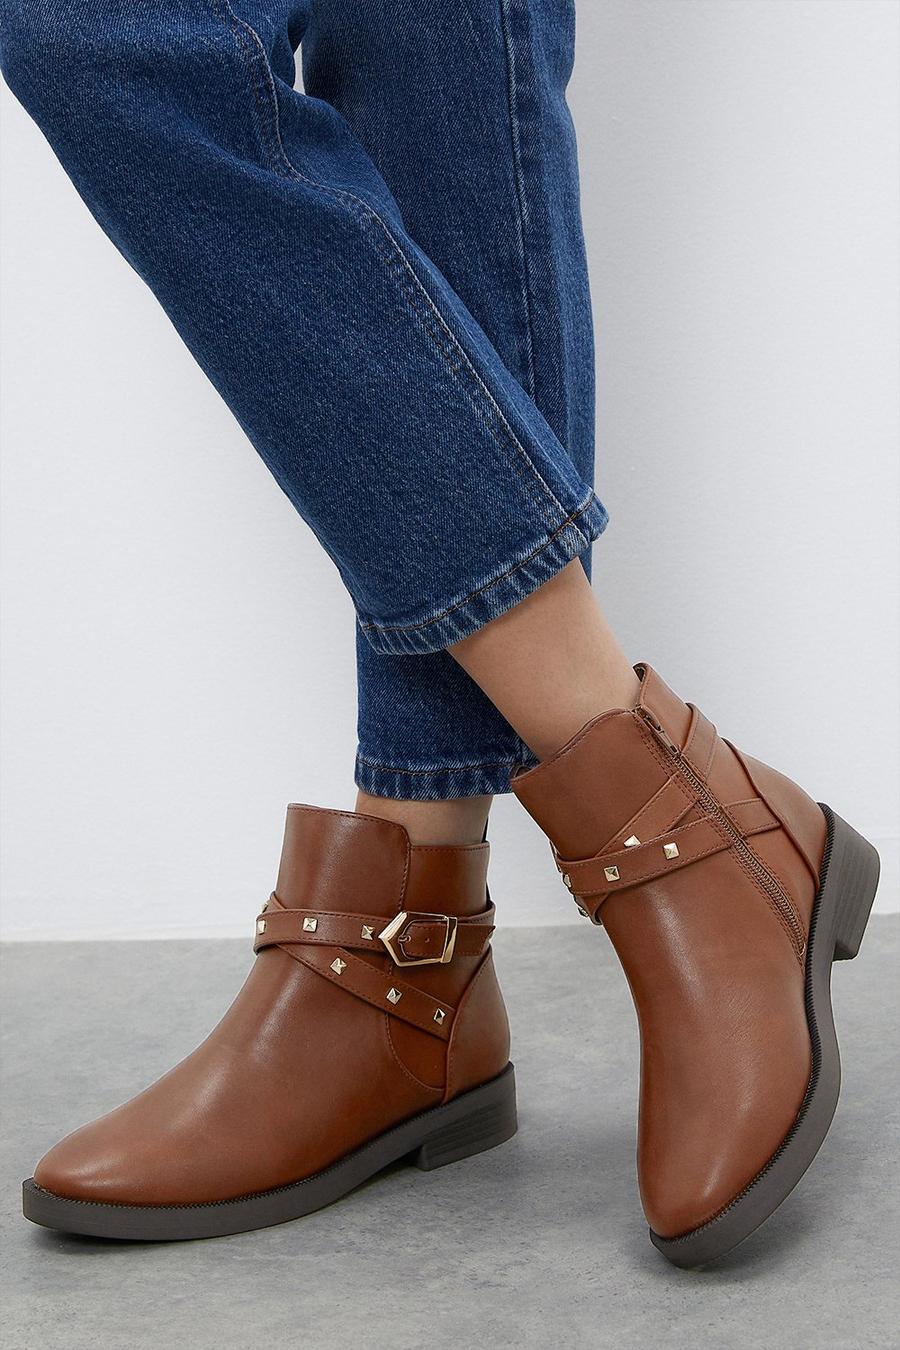 Good For The Sole: Maisie Comfort Wrap Strap Ankle Boot